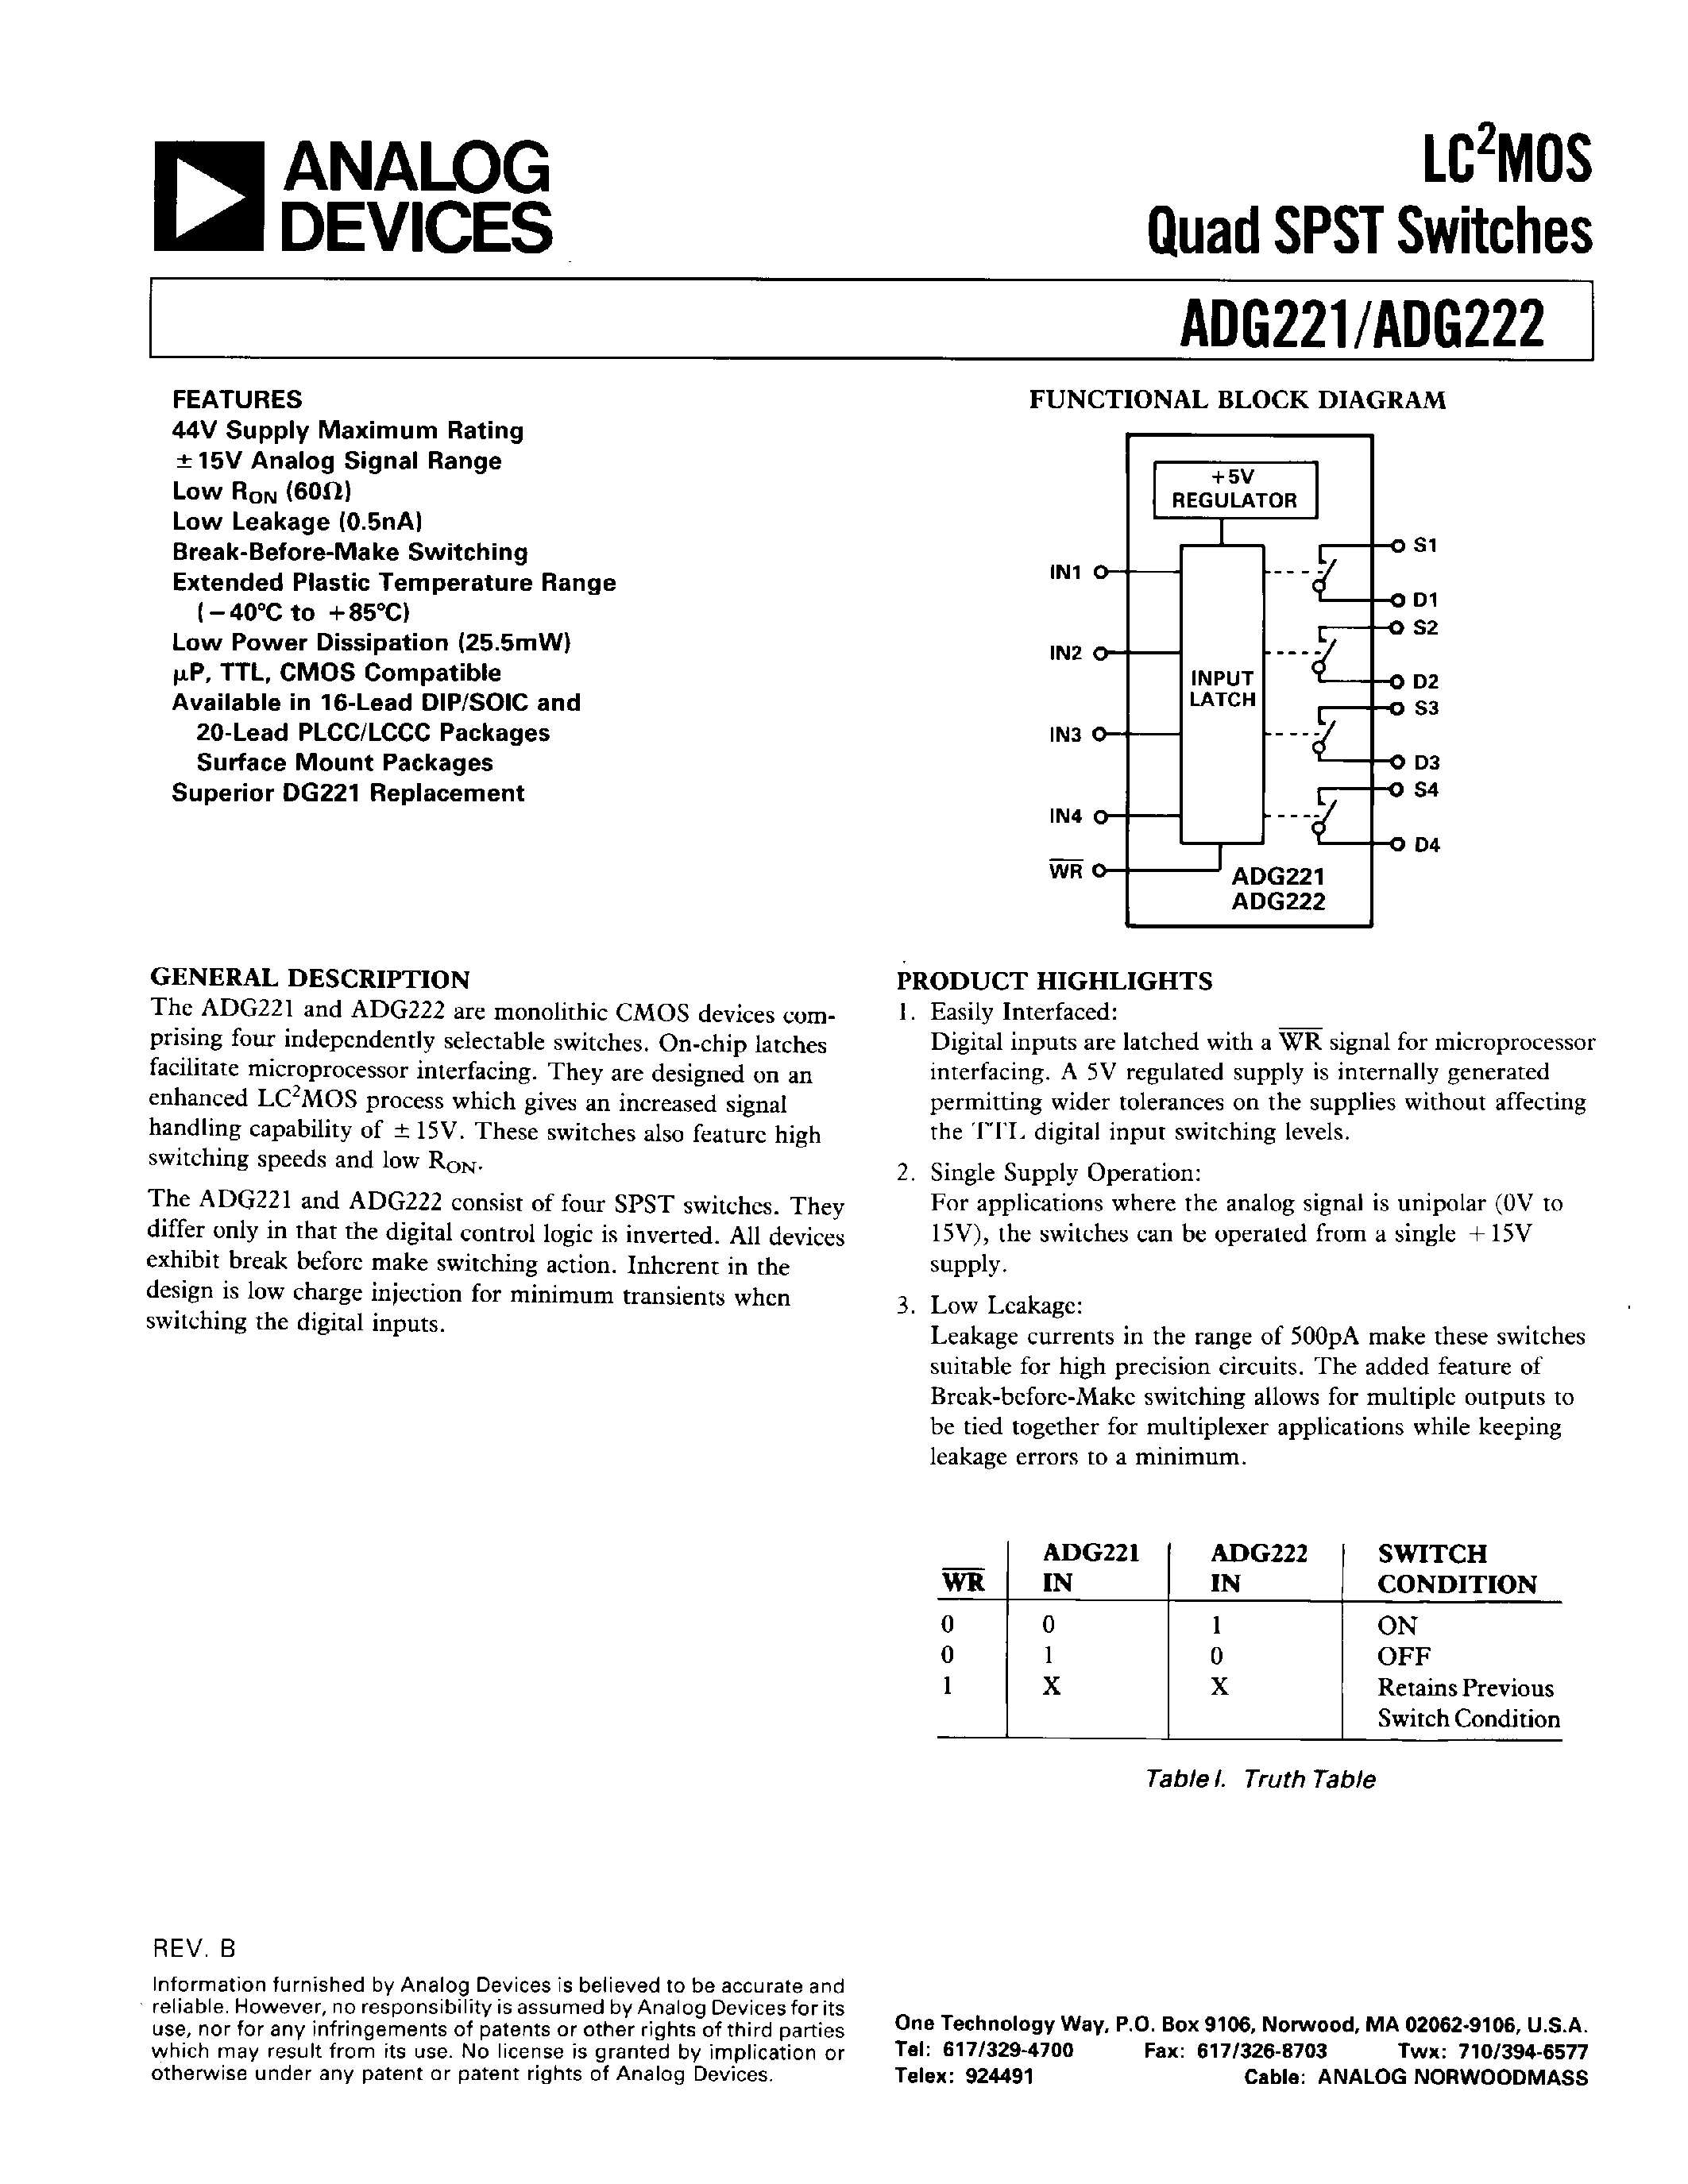 Datasheet ADG221KR - LC2MOS QUAD SPST SWITCHES page 1